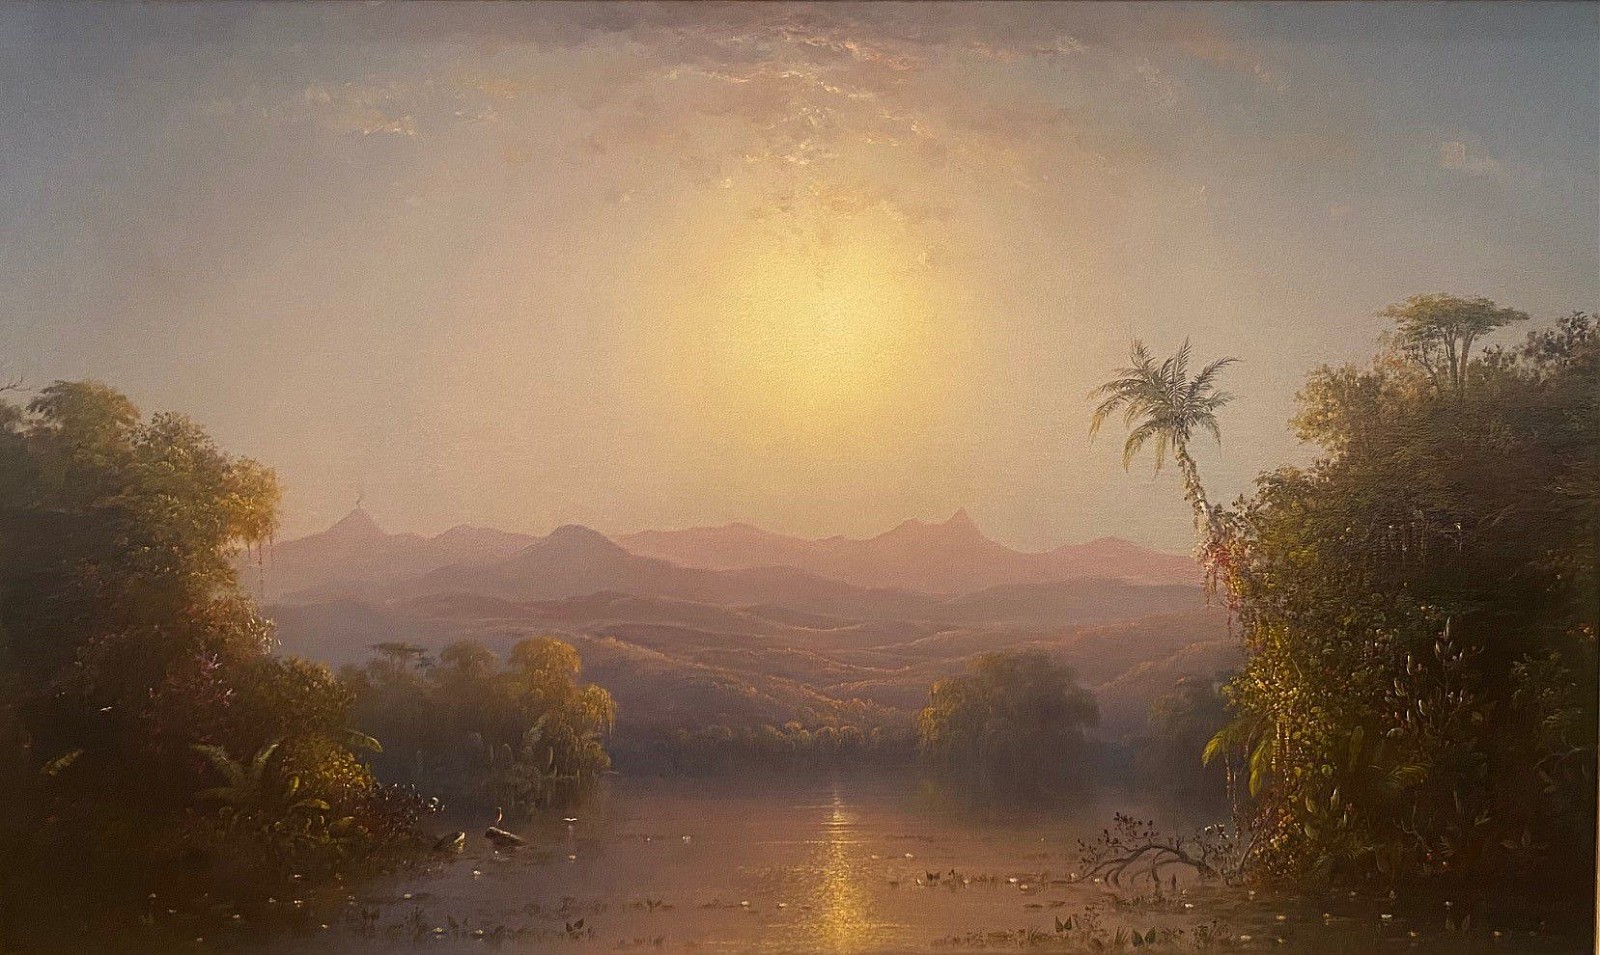 Norton Bush, Sunset in Nicaragua, 1871
oil on canvas, 30"" x 50""
JCAC 6733
$65,000